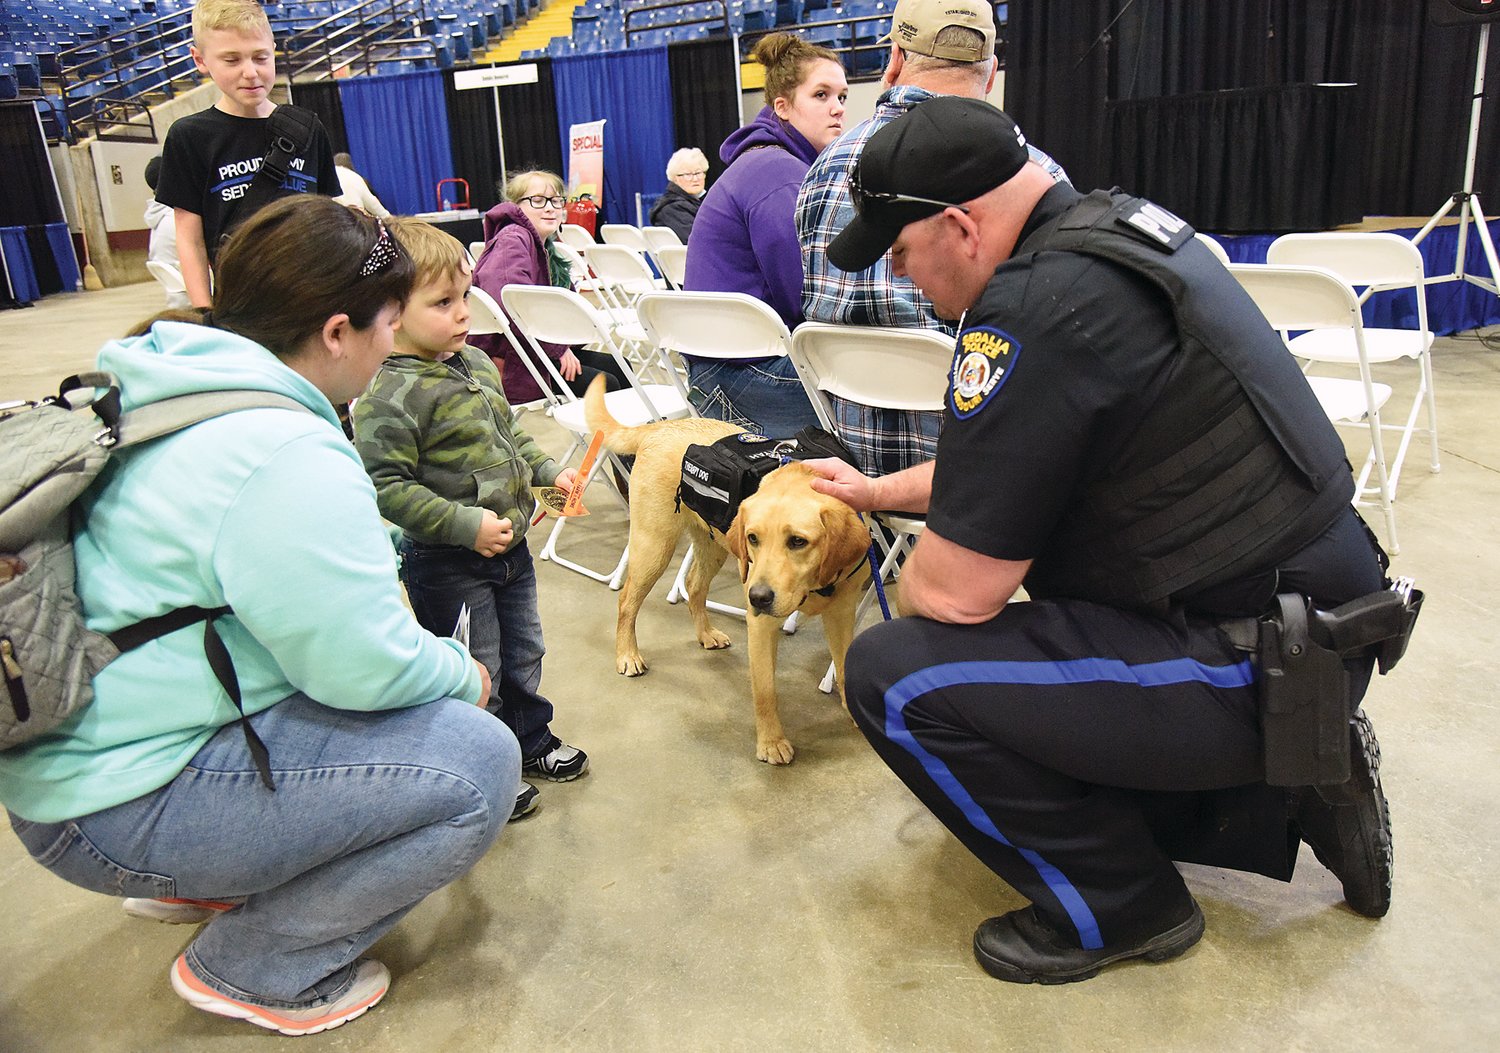 Sedalia Police Officer Antonio Karr and SPD therapy dog Kyah visits with Jackson Harbison, 3, and his mother, Victoria Harbison, of Sedalia, at the Home and Garden Show on the Missouri State Fairgrounds. SPD Sgt. Casey DeVorss said Kyah is new to the department and belongs to everyone. He added Kyah will bridge the gap between SPD and the community and “humanize the badge.”